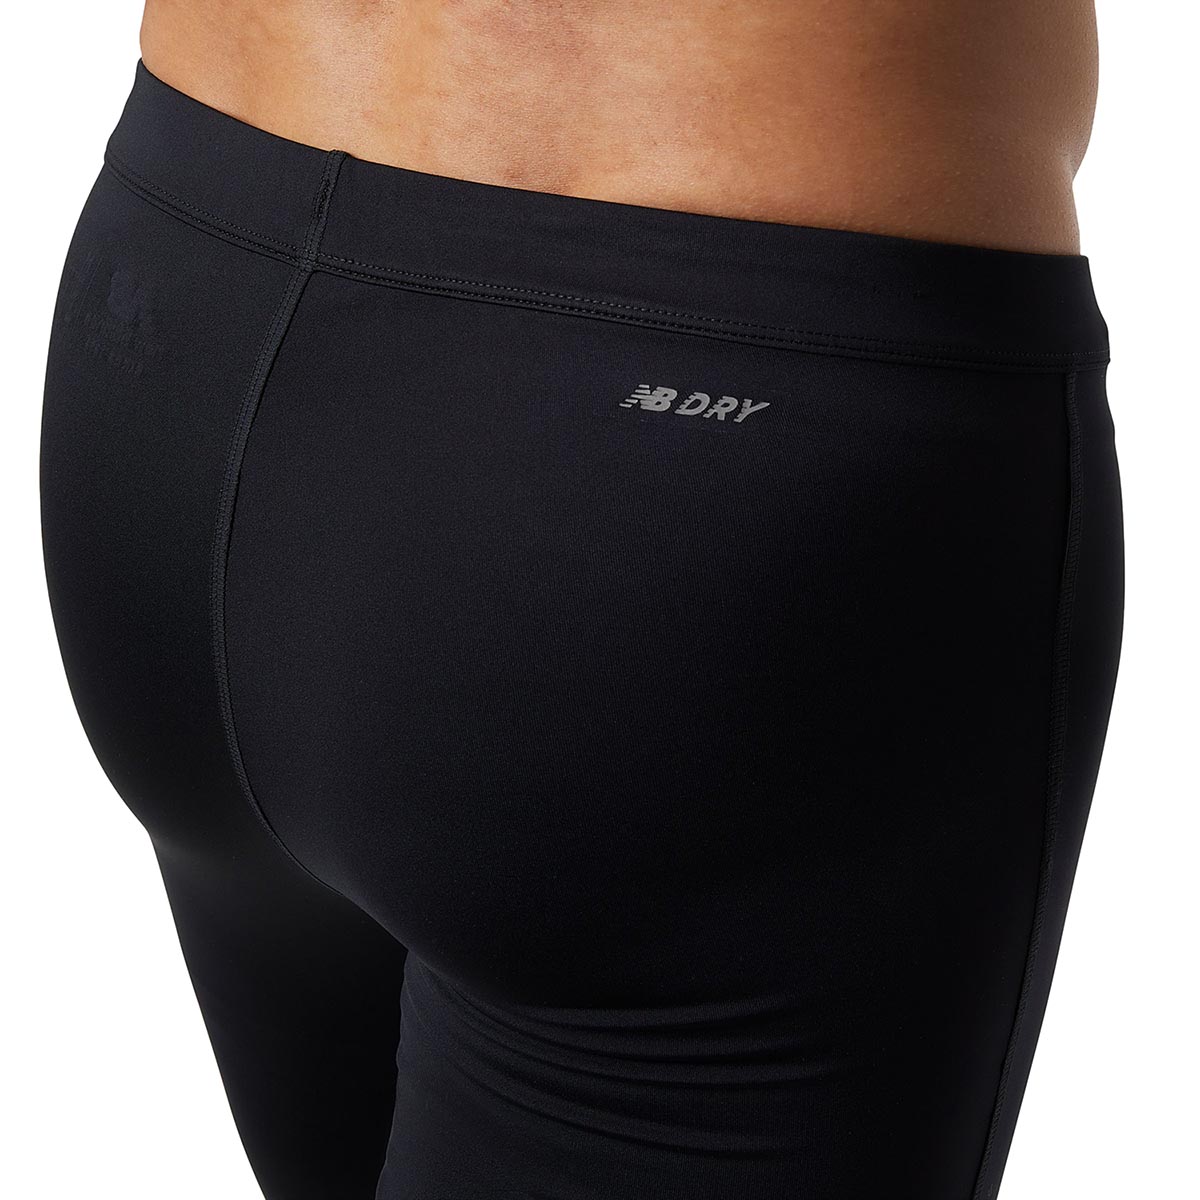 NEW BALANCE - ACCELERATE TIGHTS